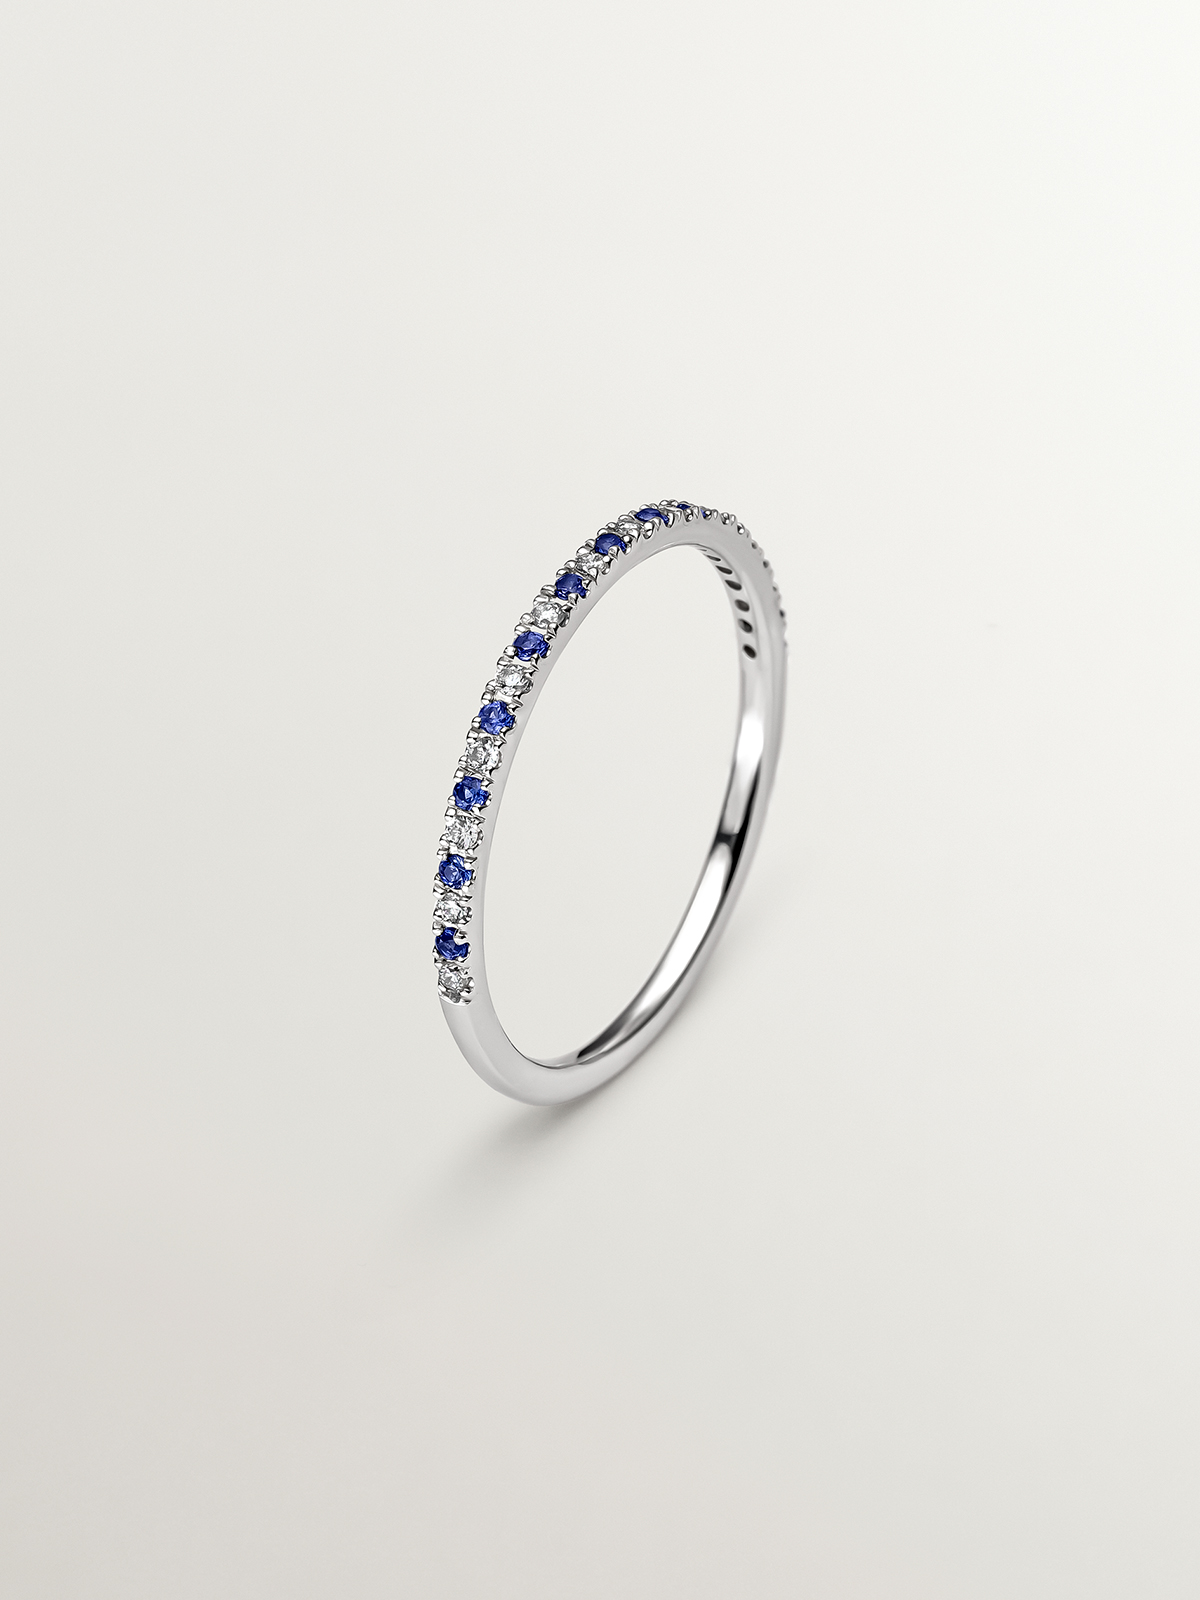 9K white gold ring with sapphires and diamonds